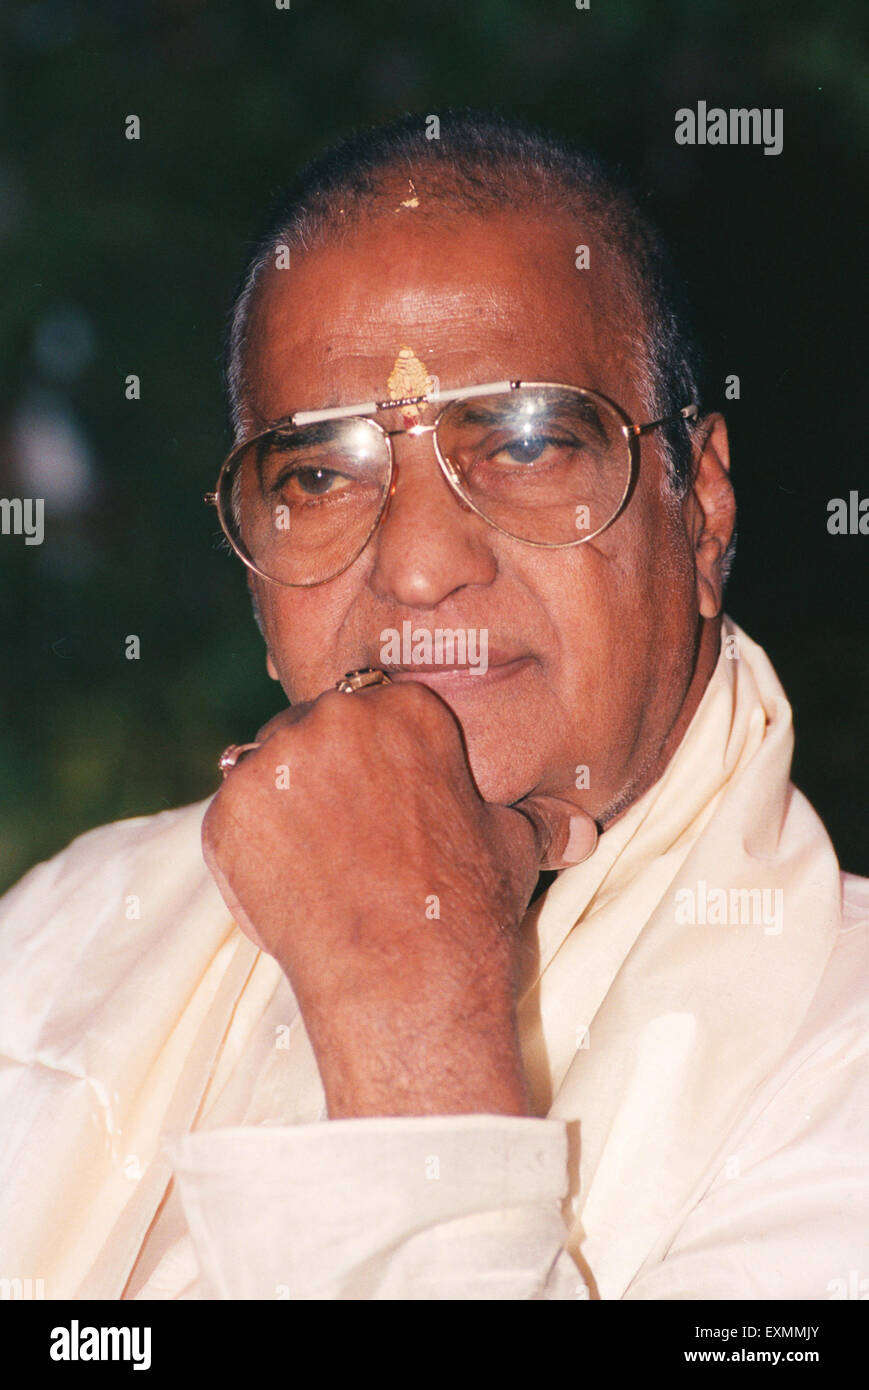 Nandamuri Taraka Rama Rao, popularly known as N. T. Rama Rao or by his initials NTR, was an Indian film actor, writer, director, producer, and politician who also served as the Chief Minister of Andhra Pradesh for three terms Stock Photo